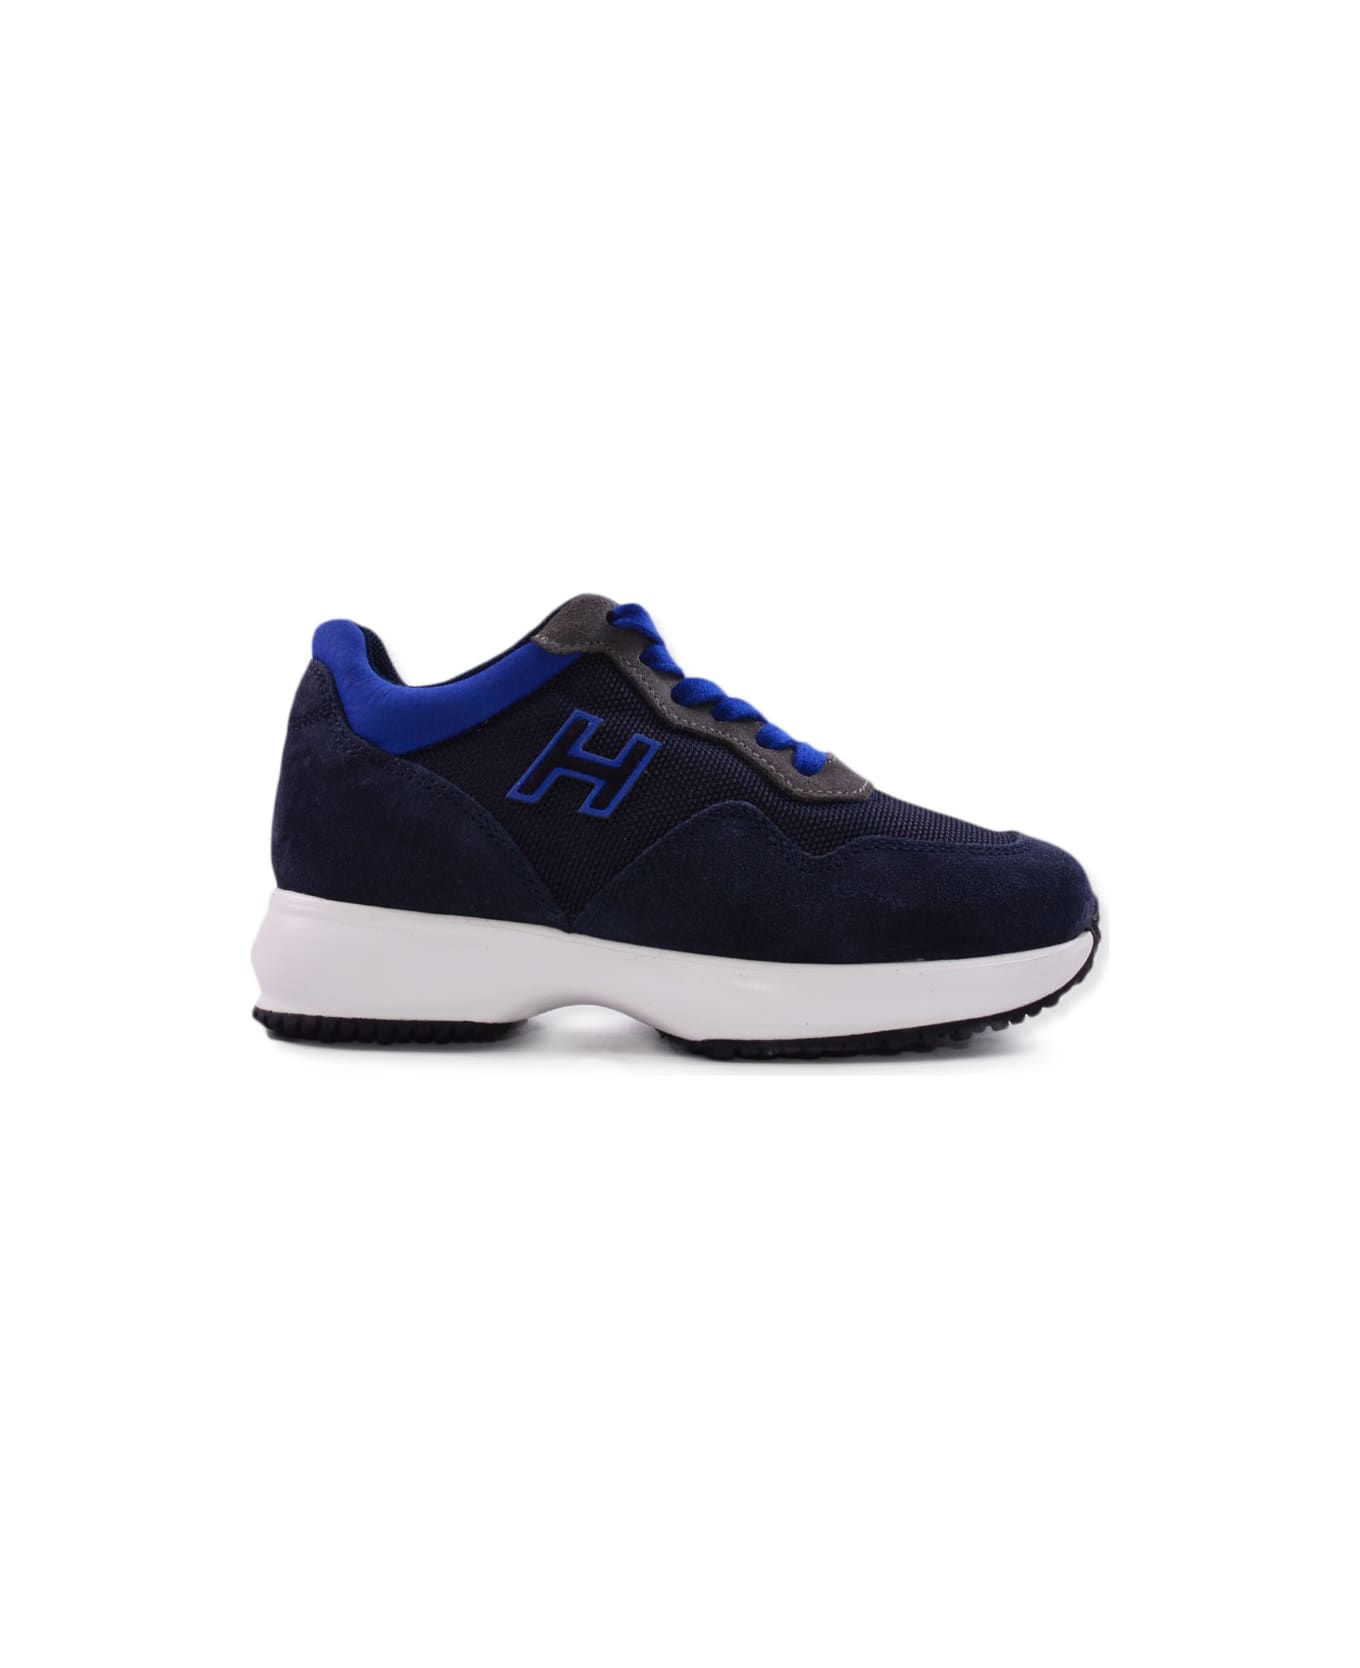 Hogan Interactive Shoe In Suede Leather - Blue